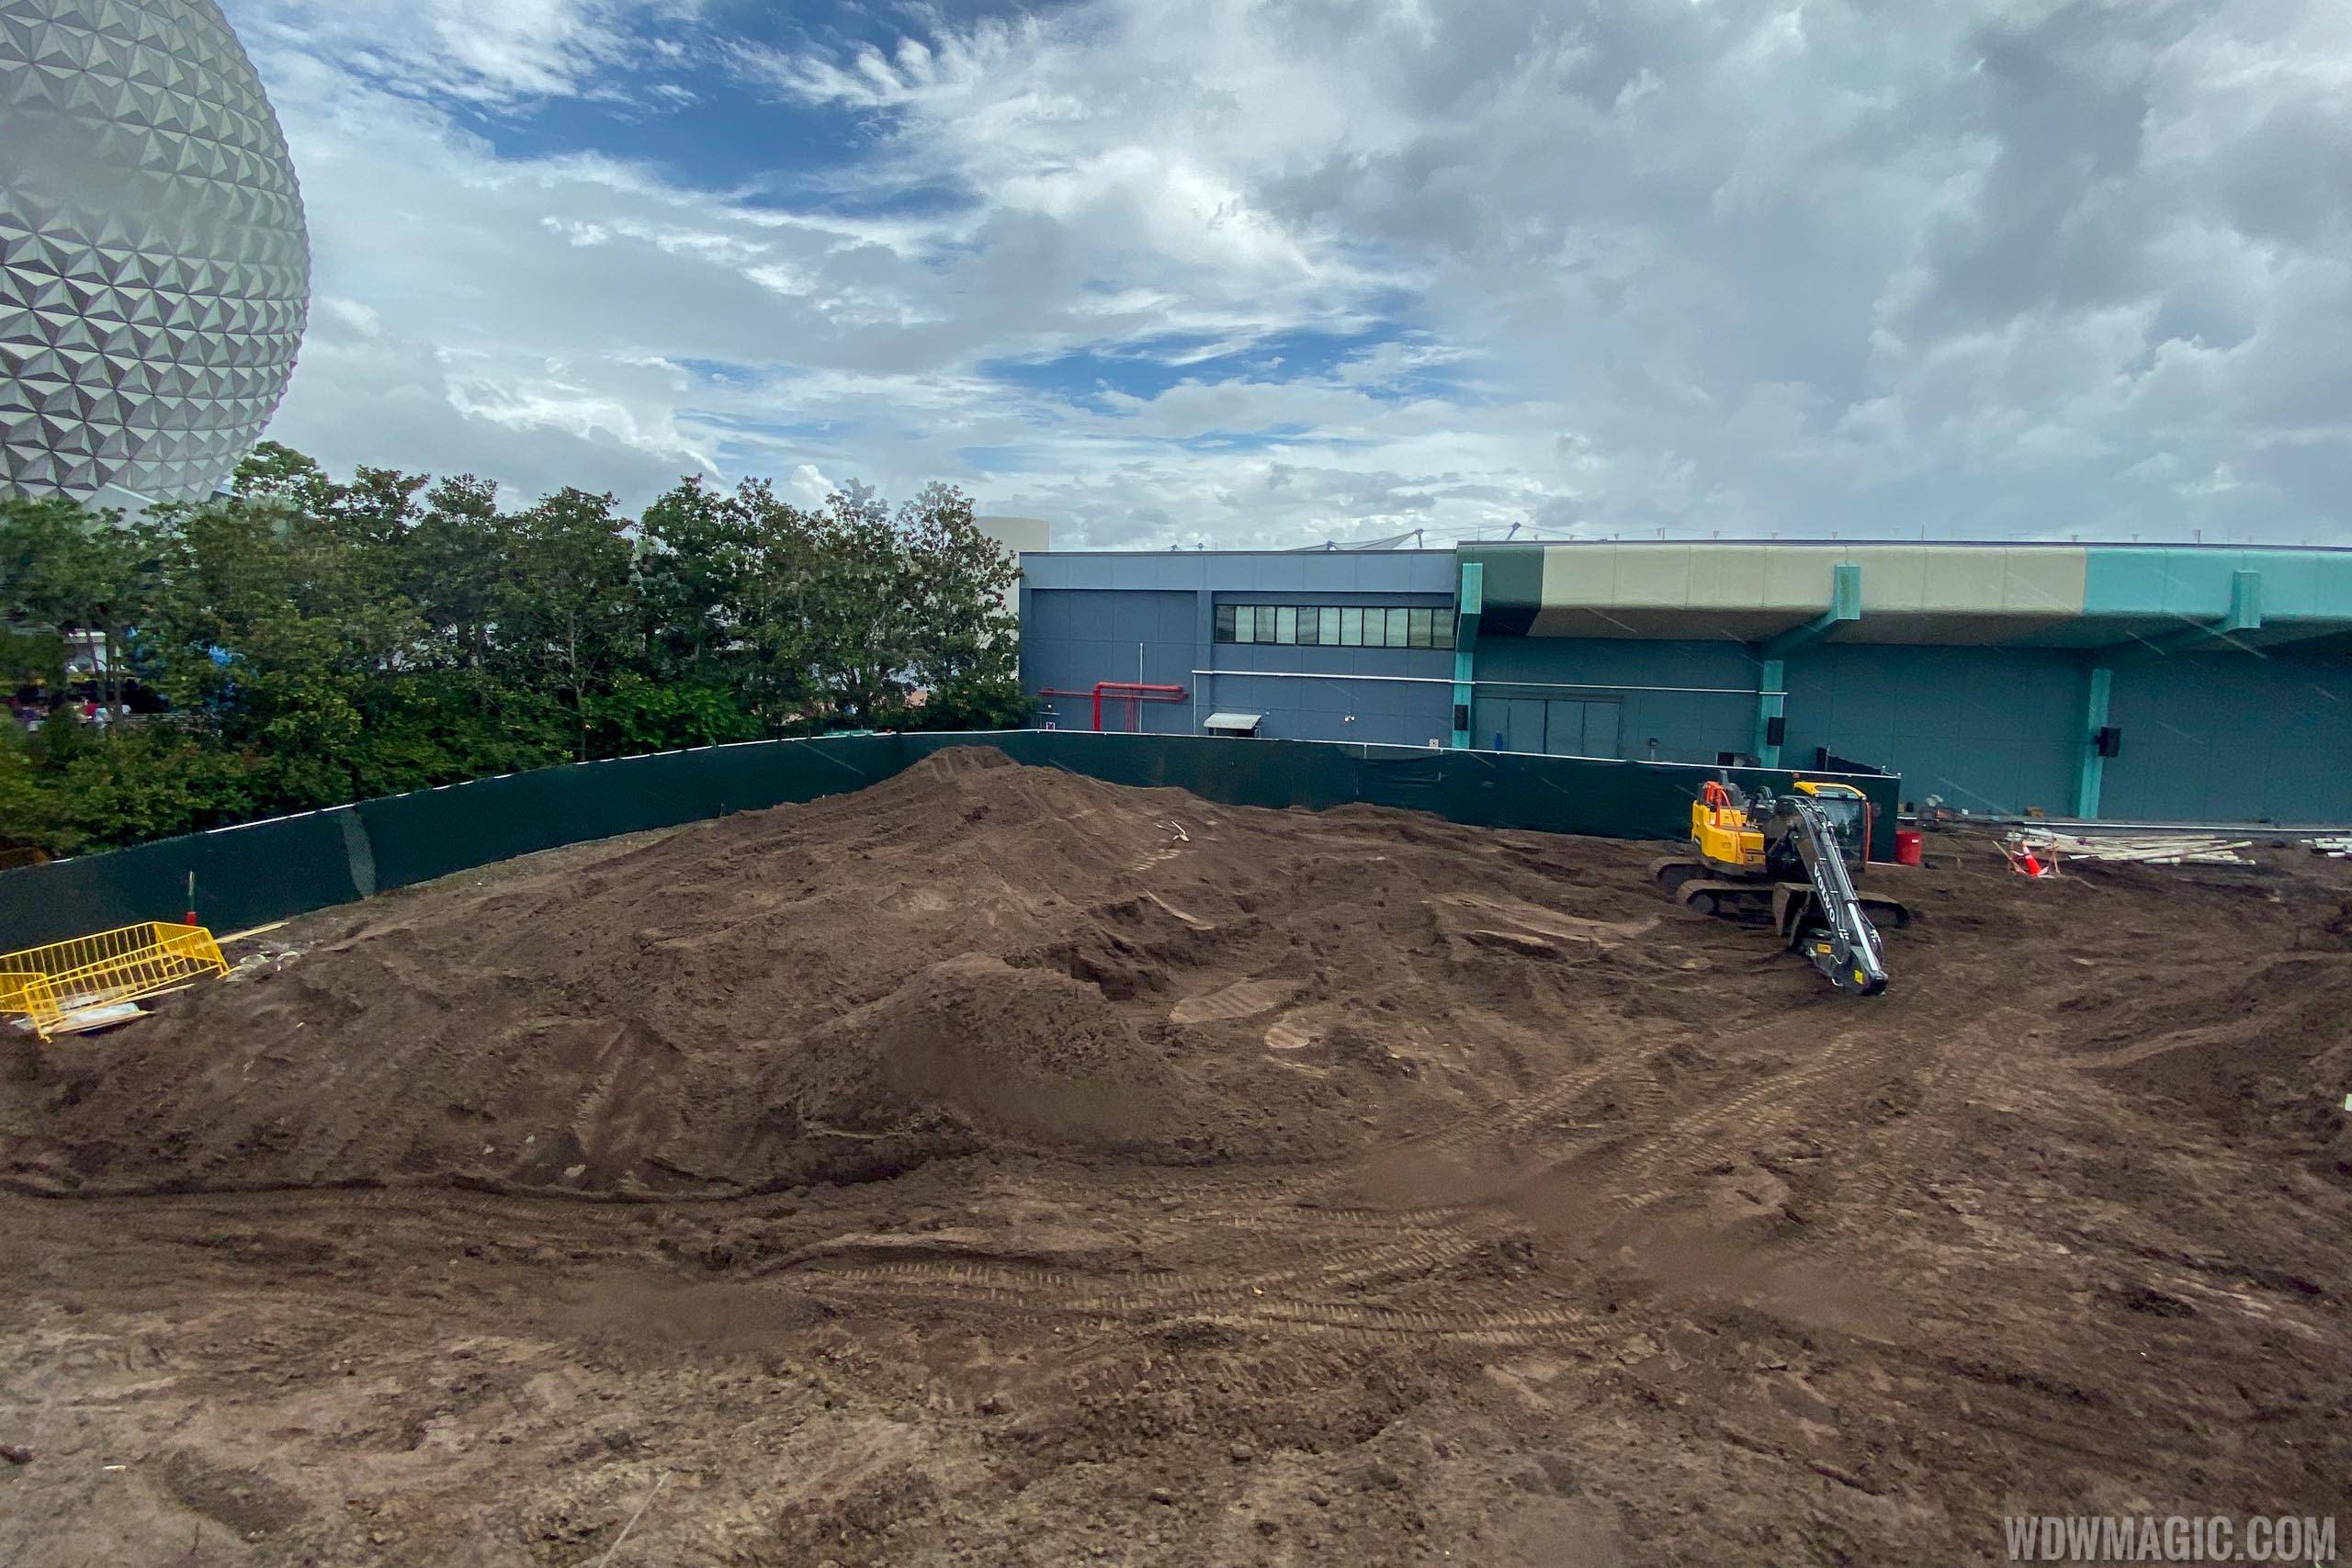 Epcot central area construction October 2019 - Between Living Seas and Innoventions West